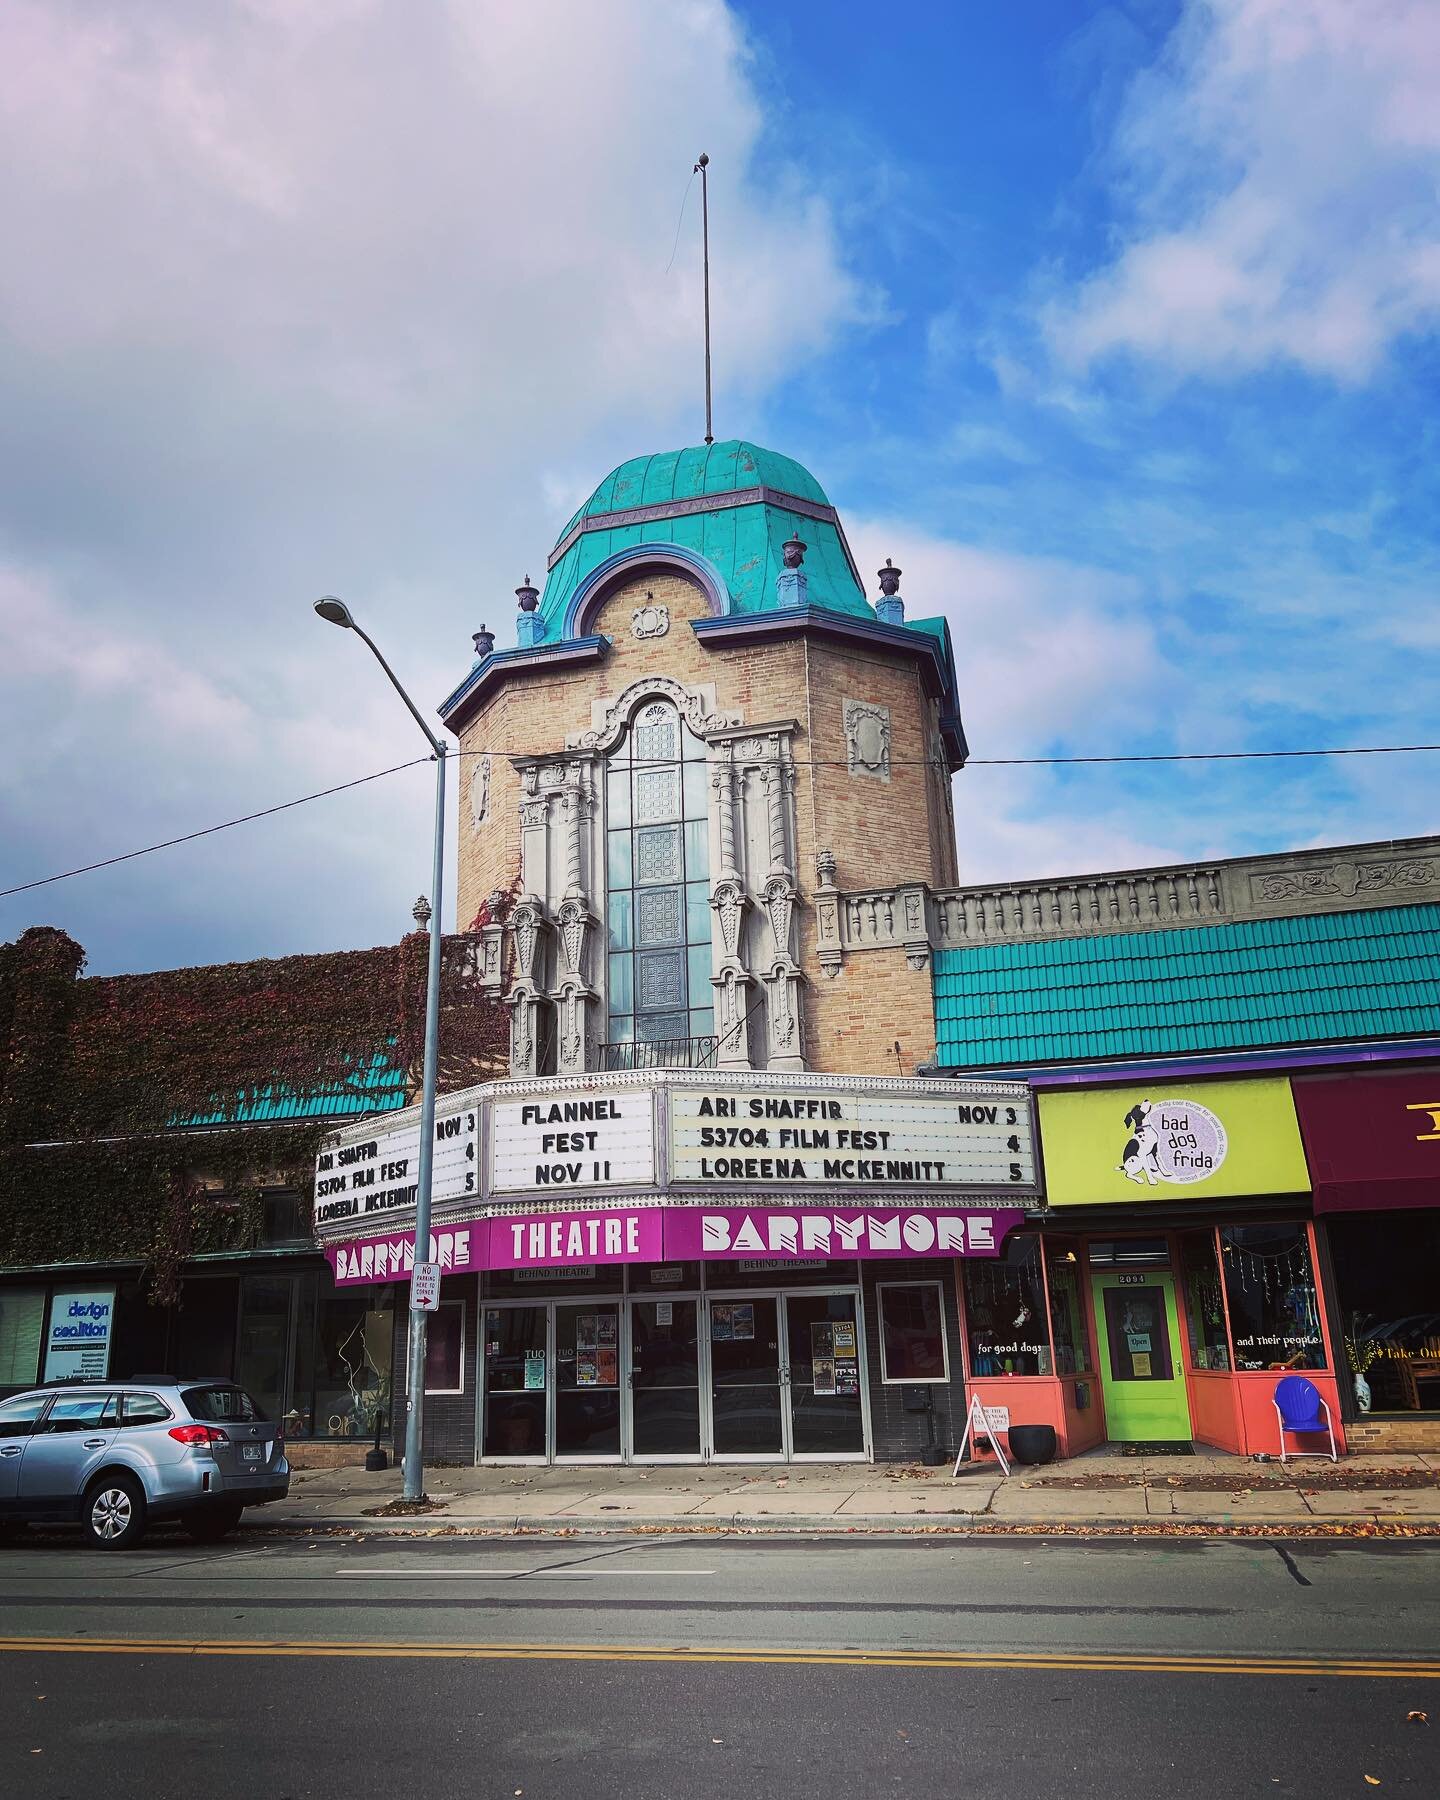 Hello Madison! All Who Wander is screening at the Barrymore Theatre on Thursday November 16, at 7pm!

Get your tickets here:

https://barrymorelive.com/event/all-who-wander/

#allwhowander #film #wisconsinfilmmakers #barrymoretheatre